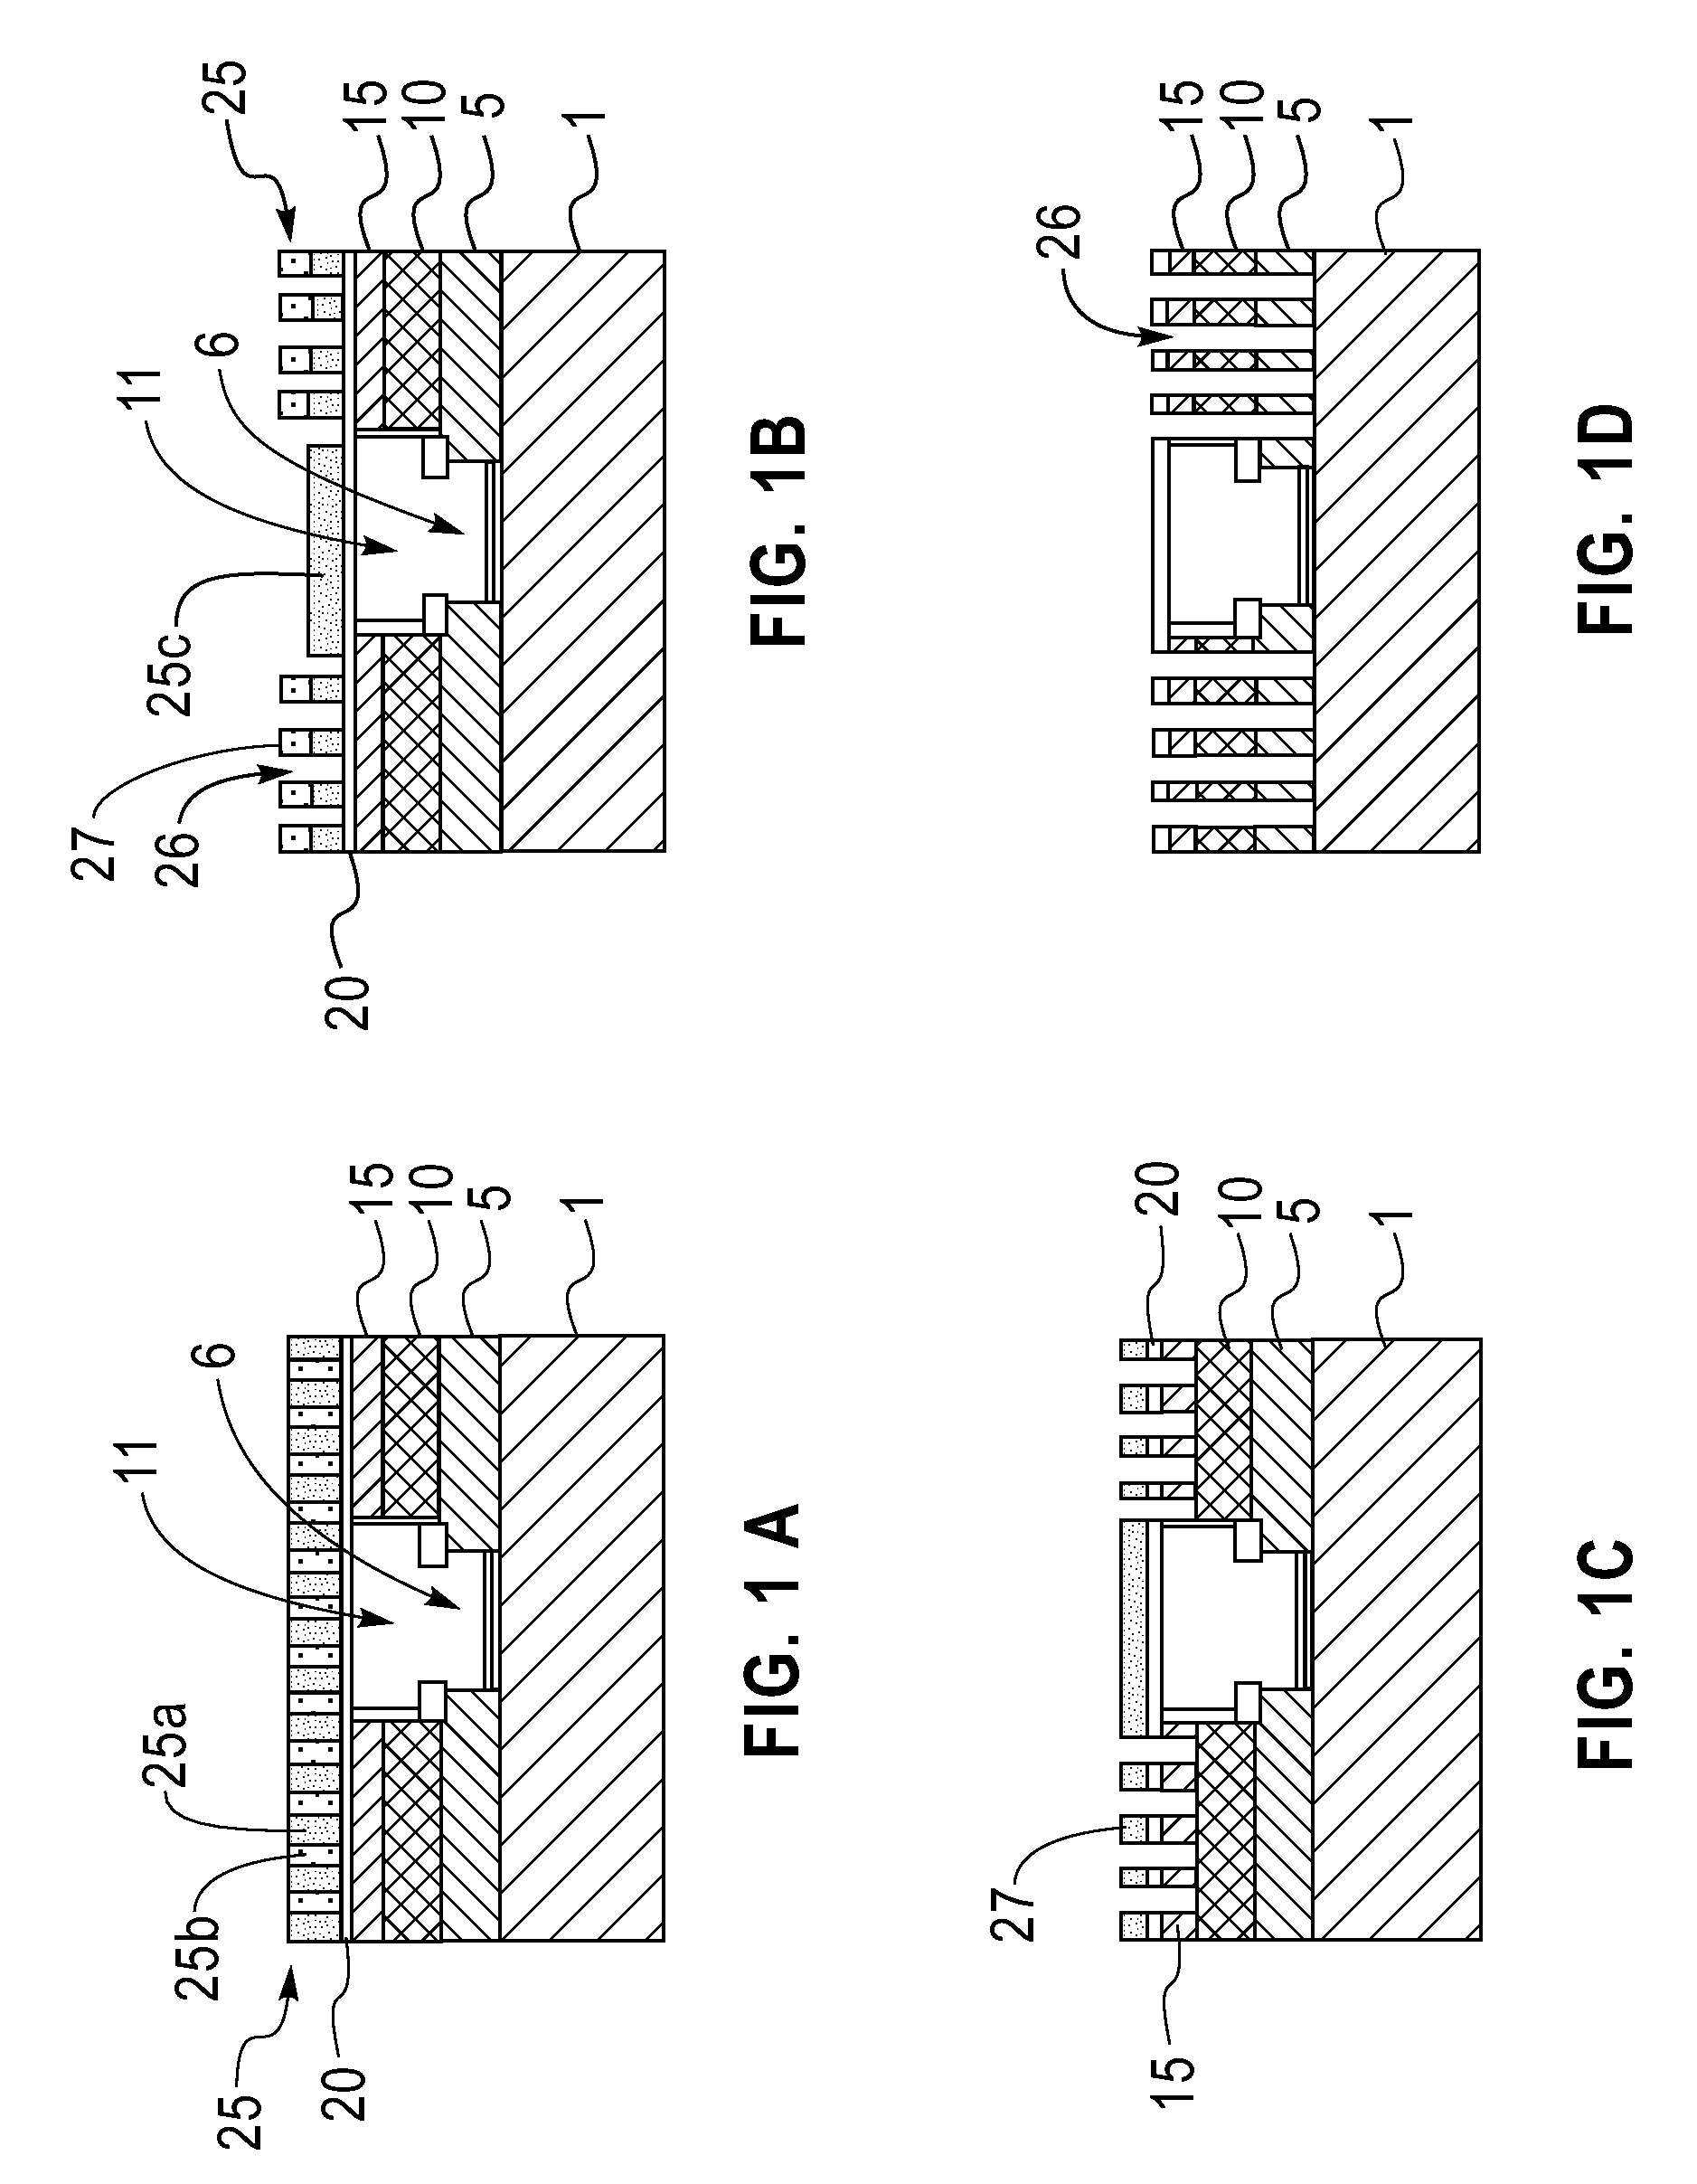 Method for fabricating self-aligned nanostructure using self-assembly block copolymers, and structures fabricated therefrom